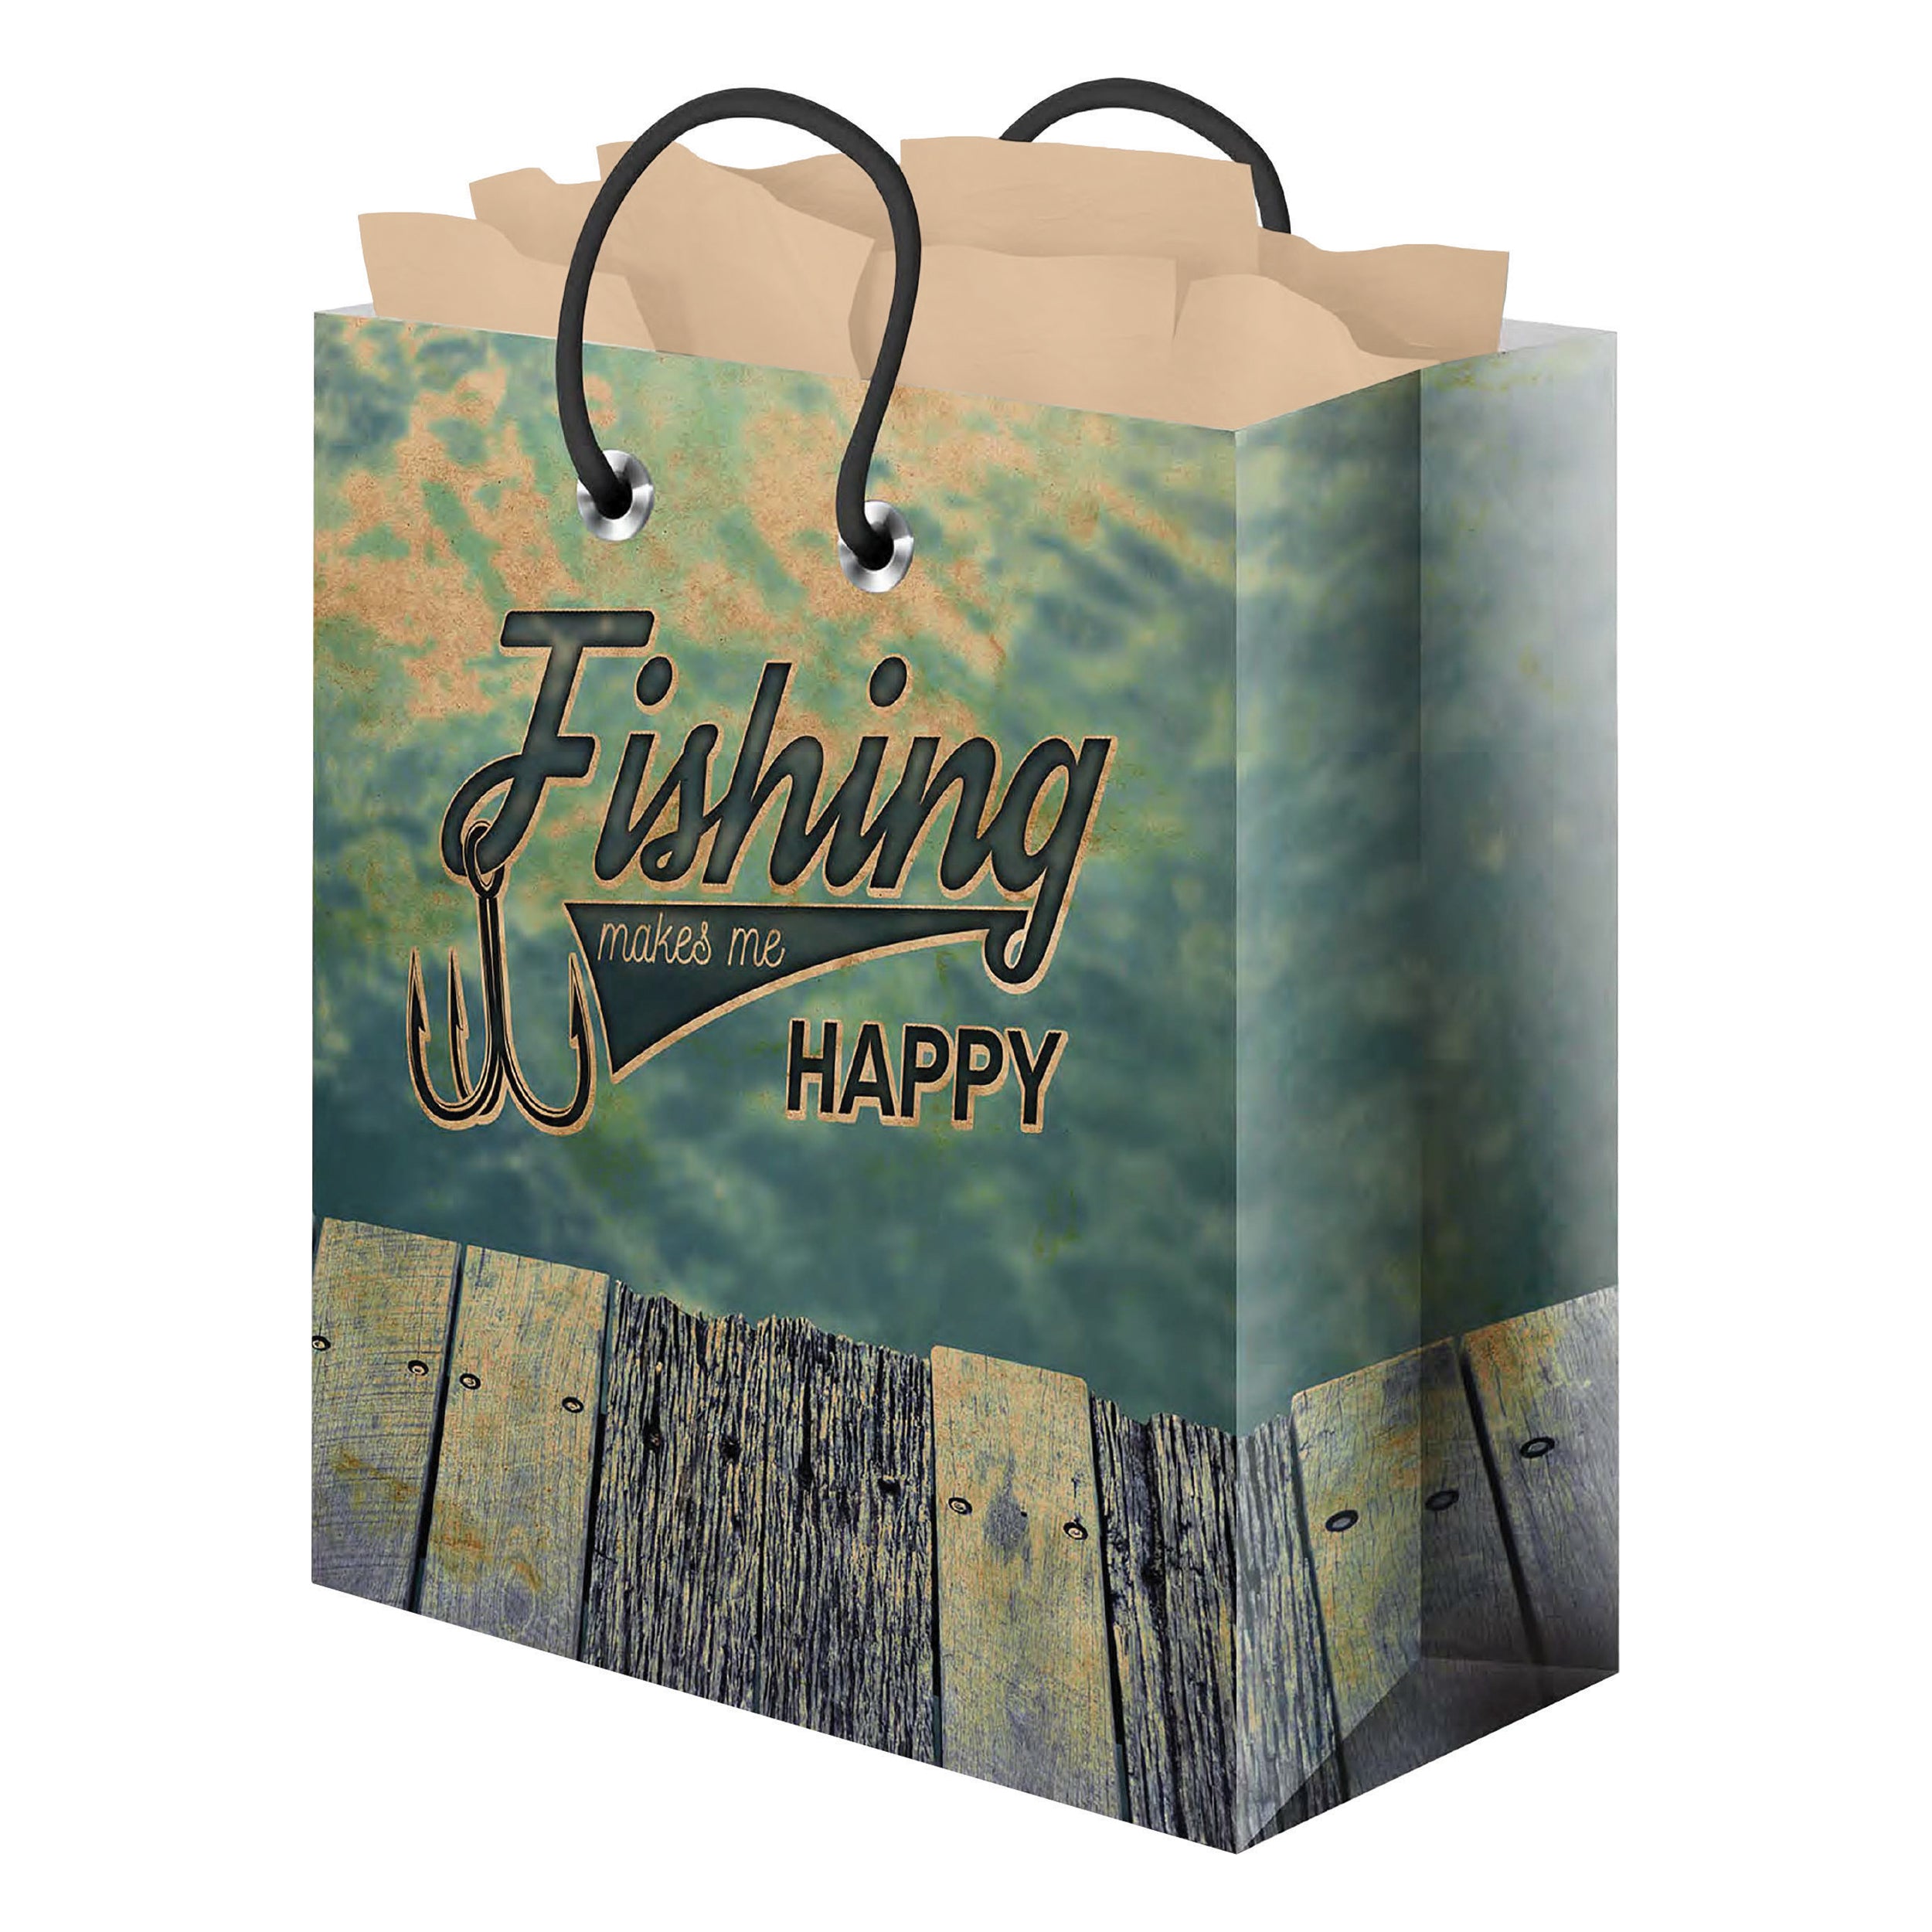 Gift Bag Medium with Tissue Paper - Fishing Happy – Rivers Edge Products